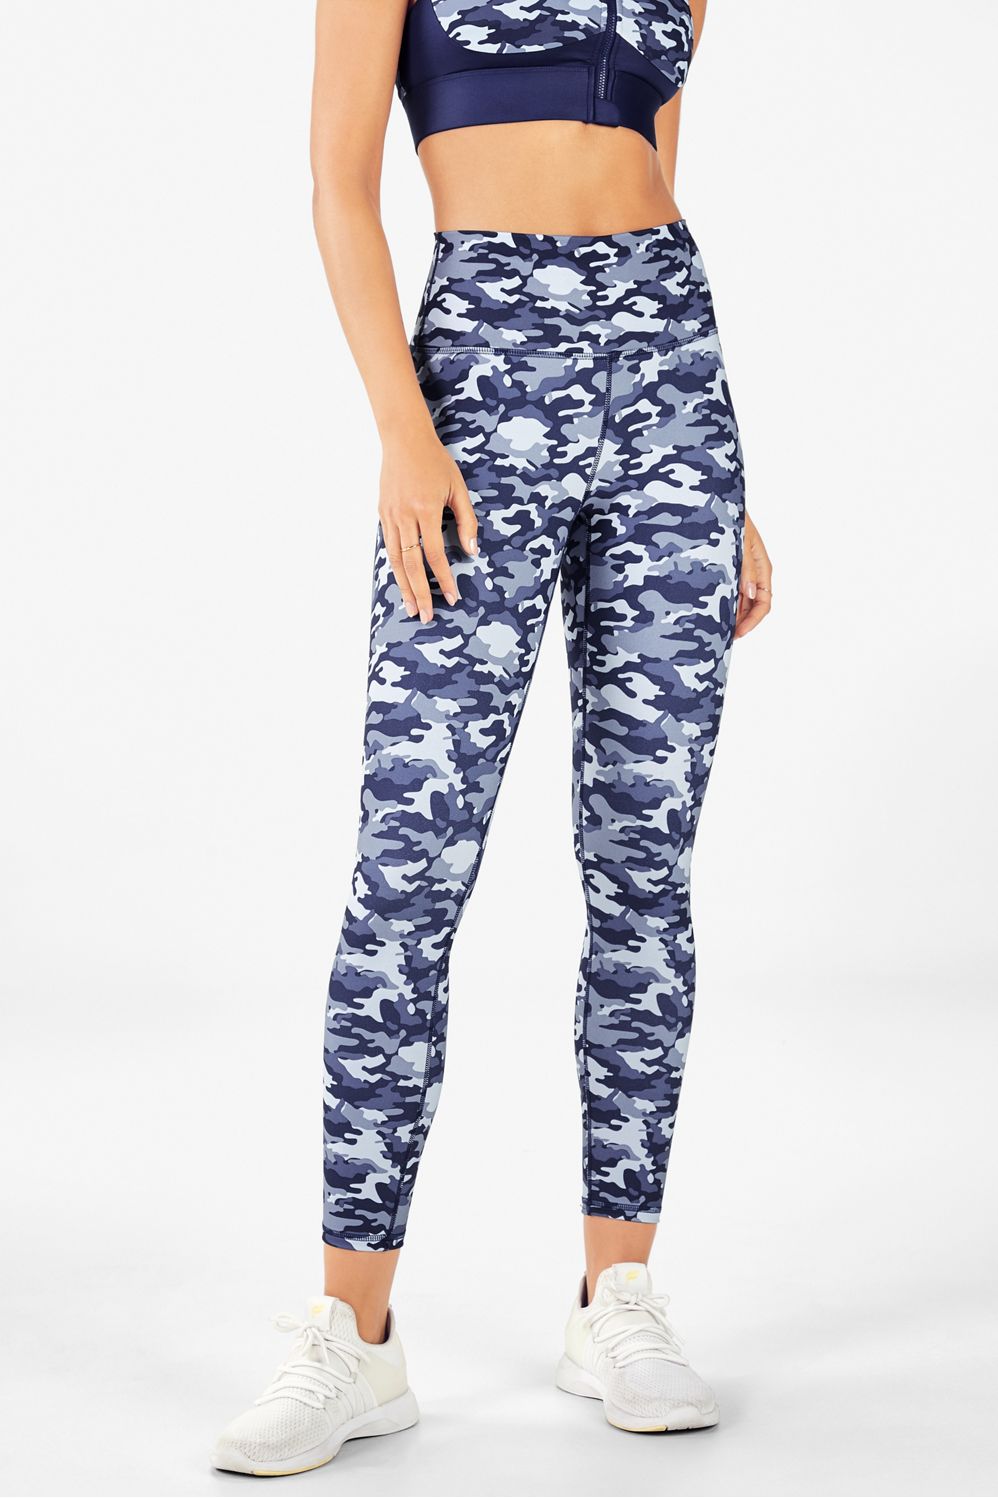 Fabletics Motion360 navy blue. Powerhold camo blue green and purple's.